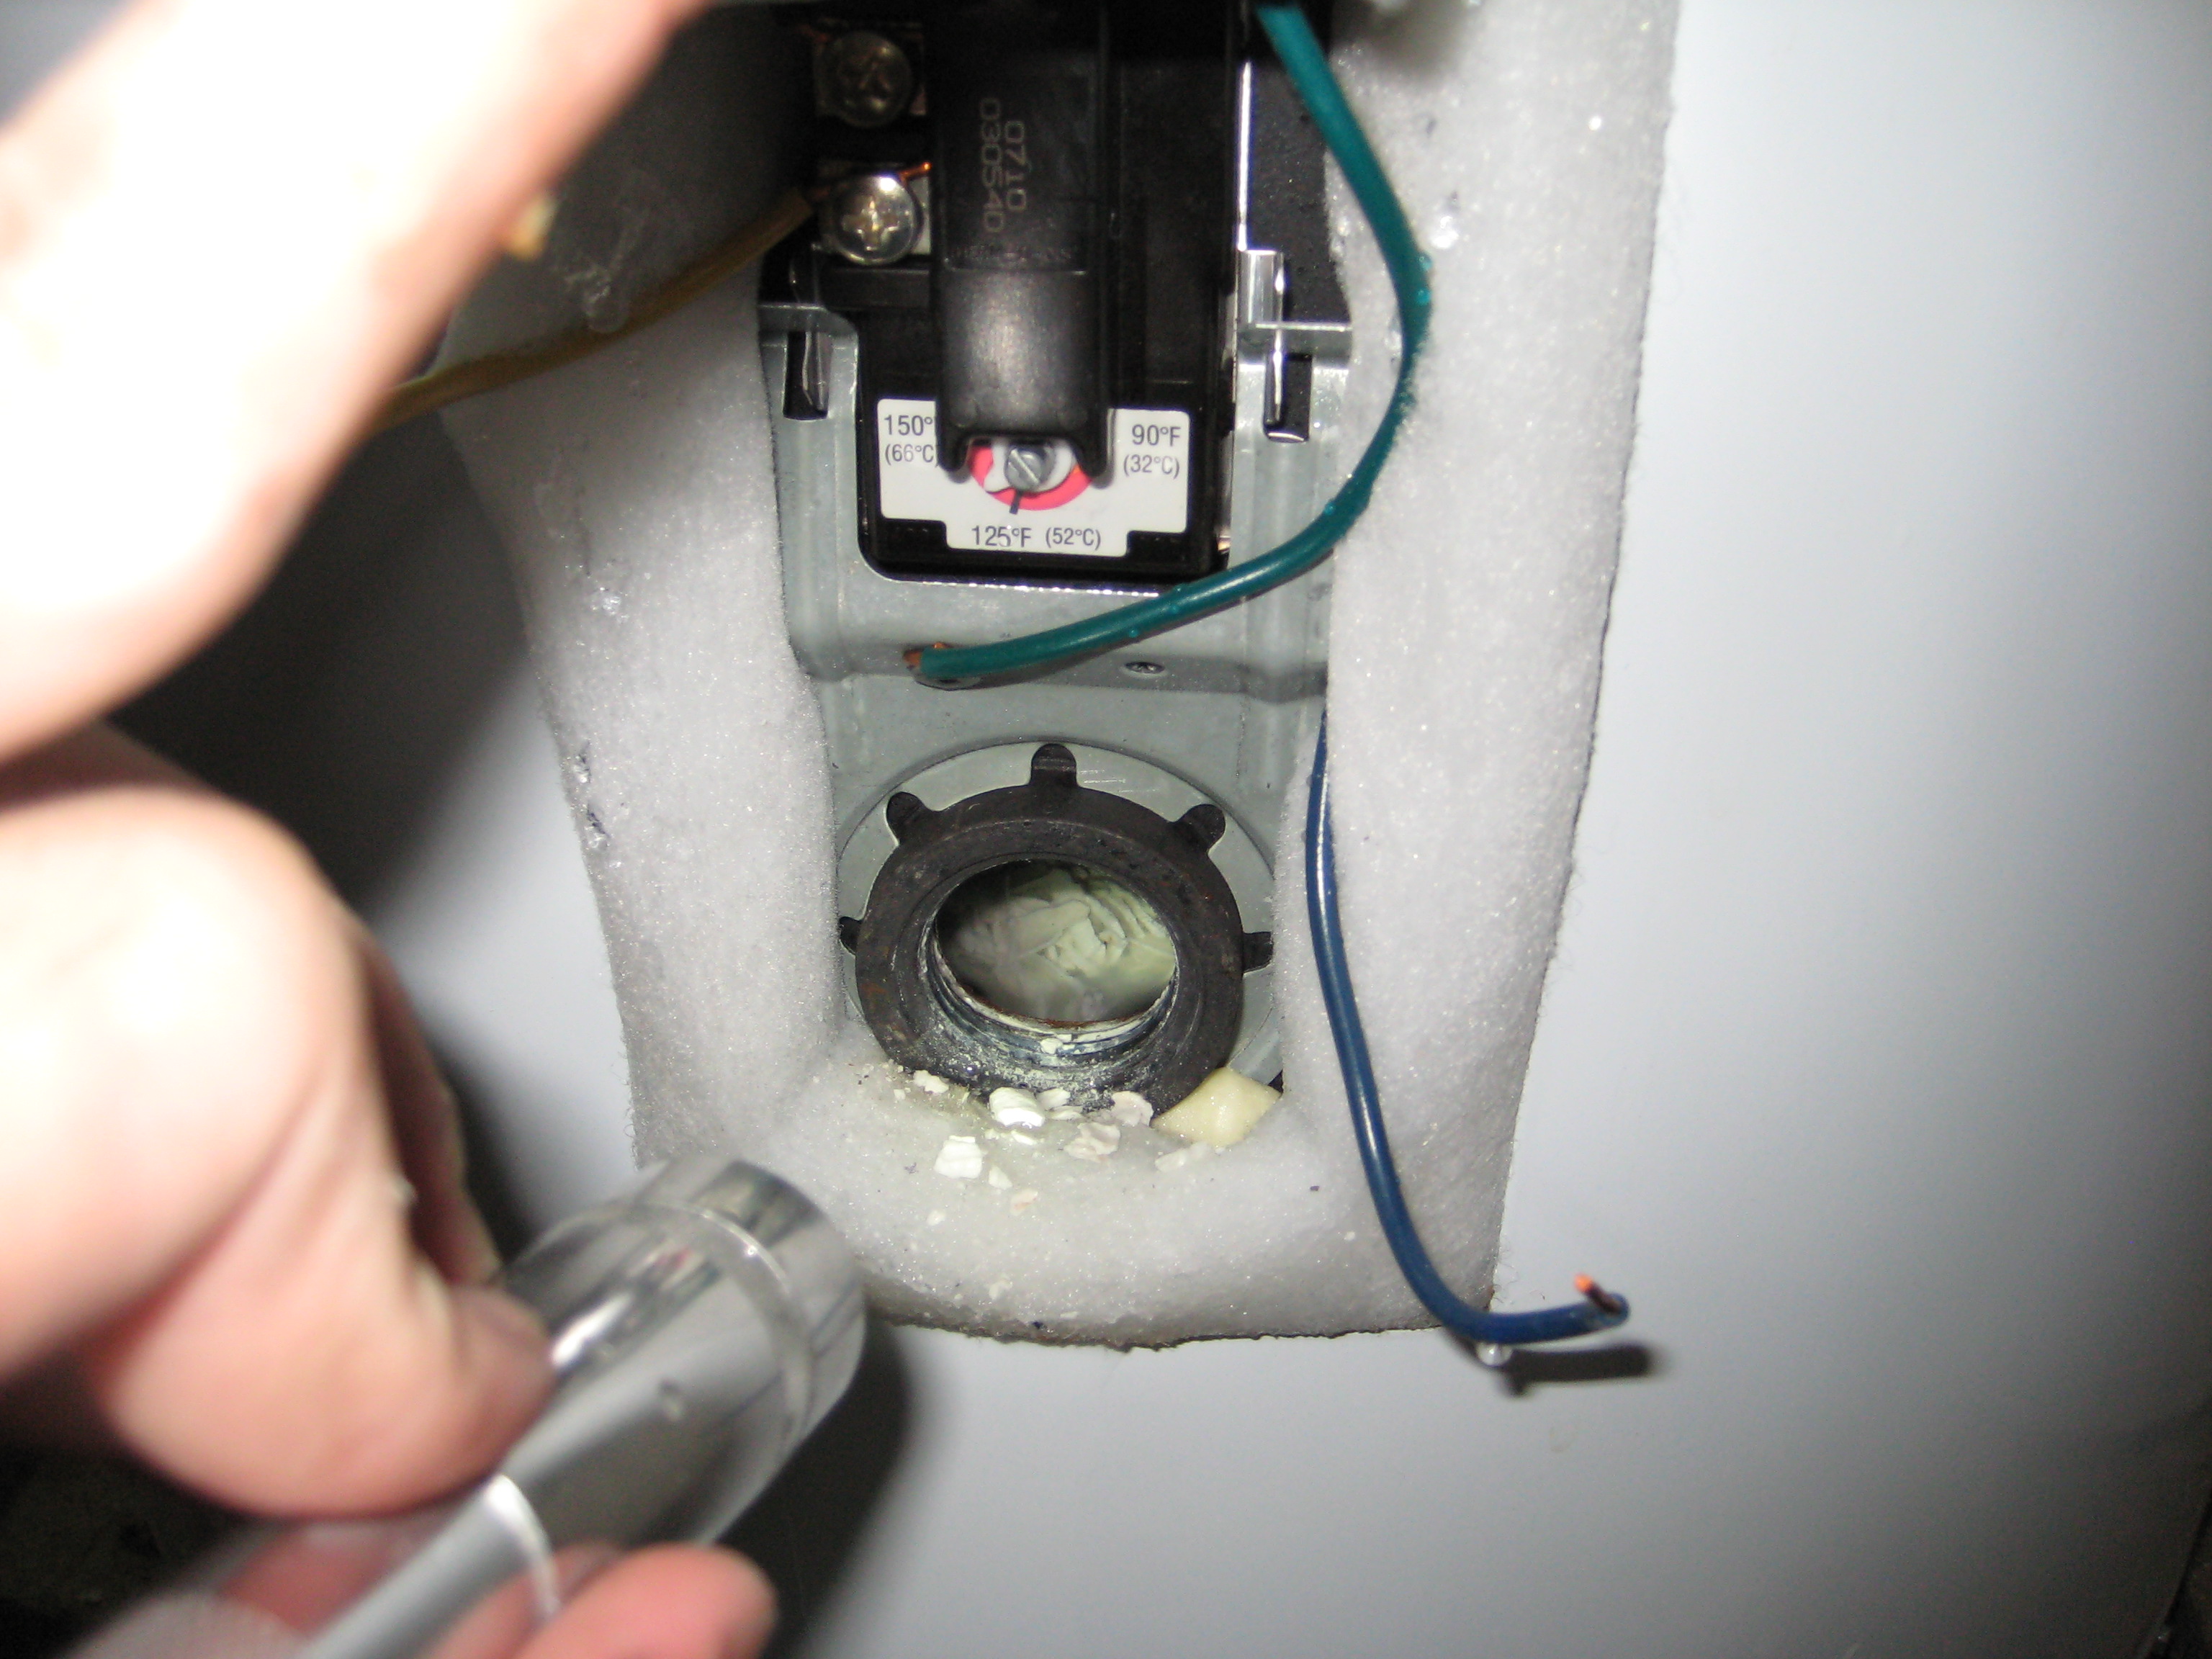 Water Heater Cleaning How To Remove Calcium Buildup In Water Heater